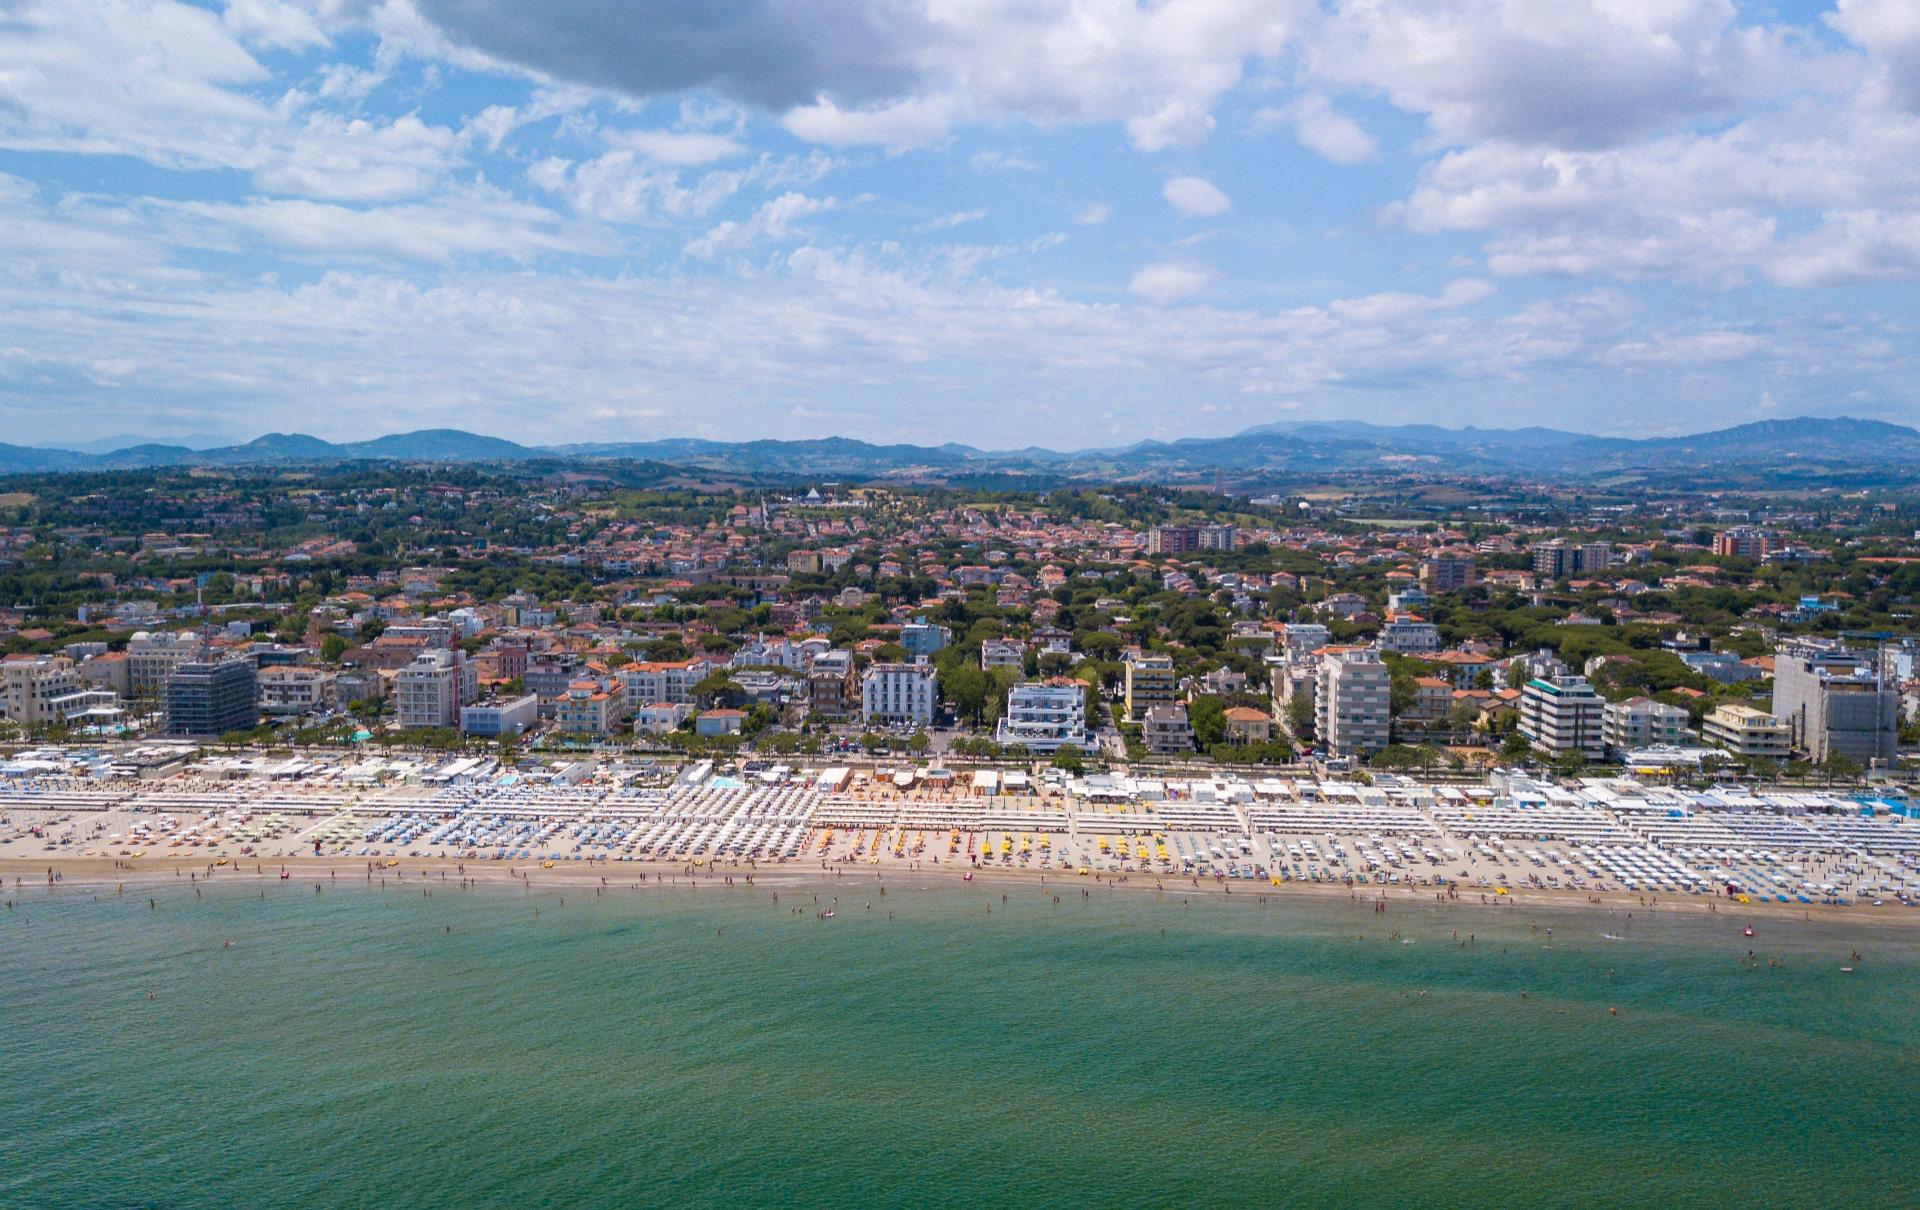 hotelpierrericcione en offer-first-week-of-september-hotel-riccione-close-to-the-sea 036